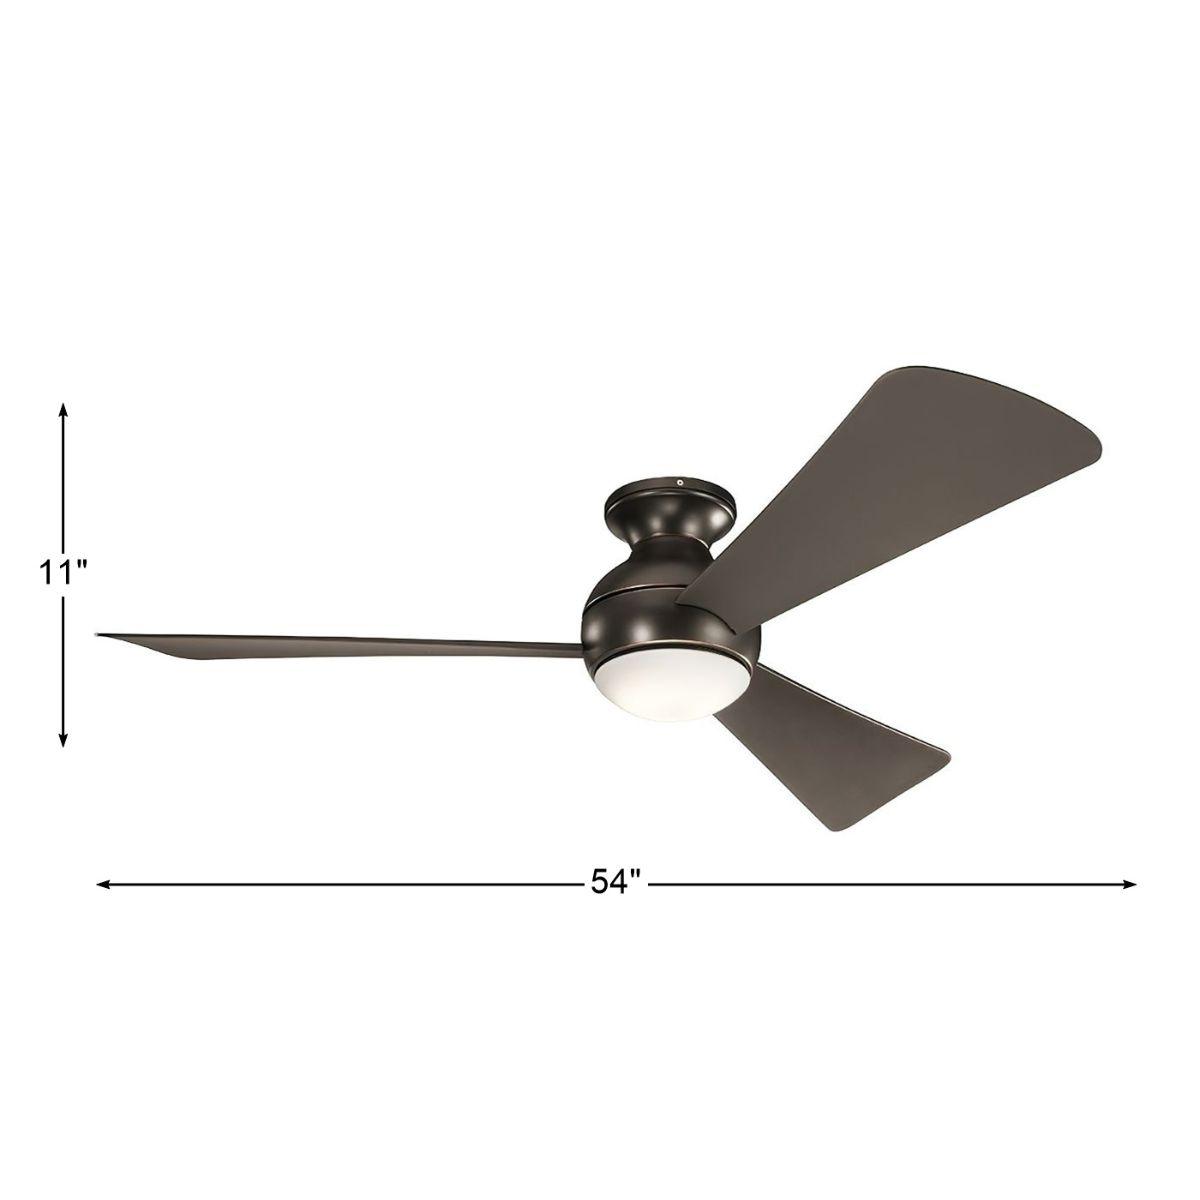 Sola 54 Inch Propeller Outdoor Ceiling Fan With Light, Wall Control Included - Bees Lighting